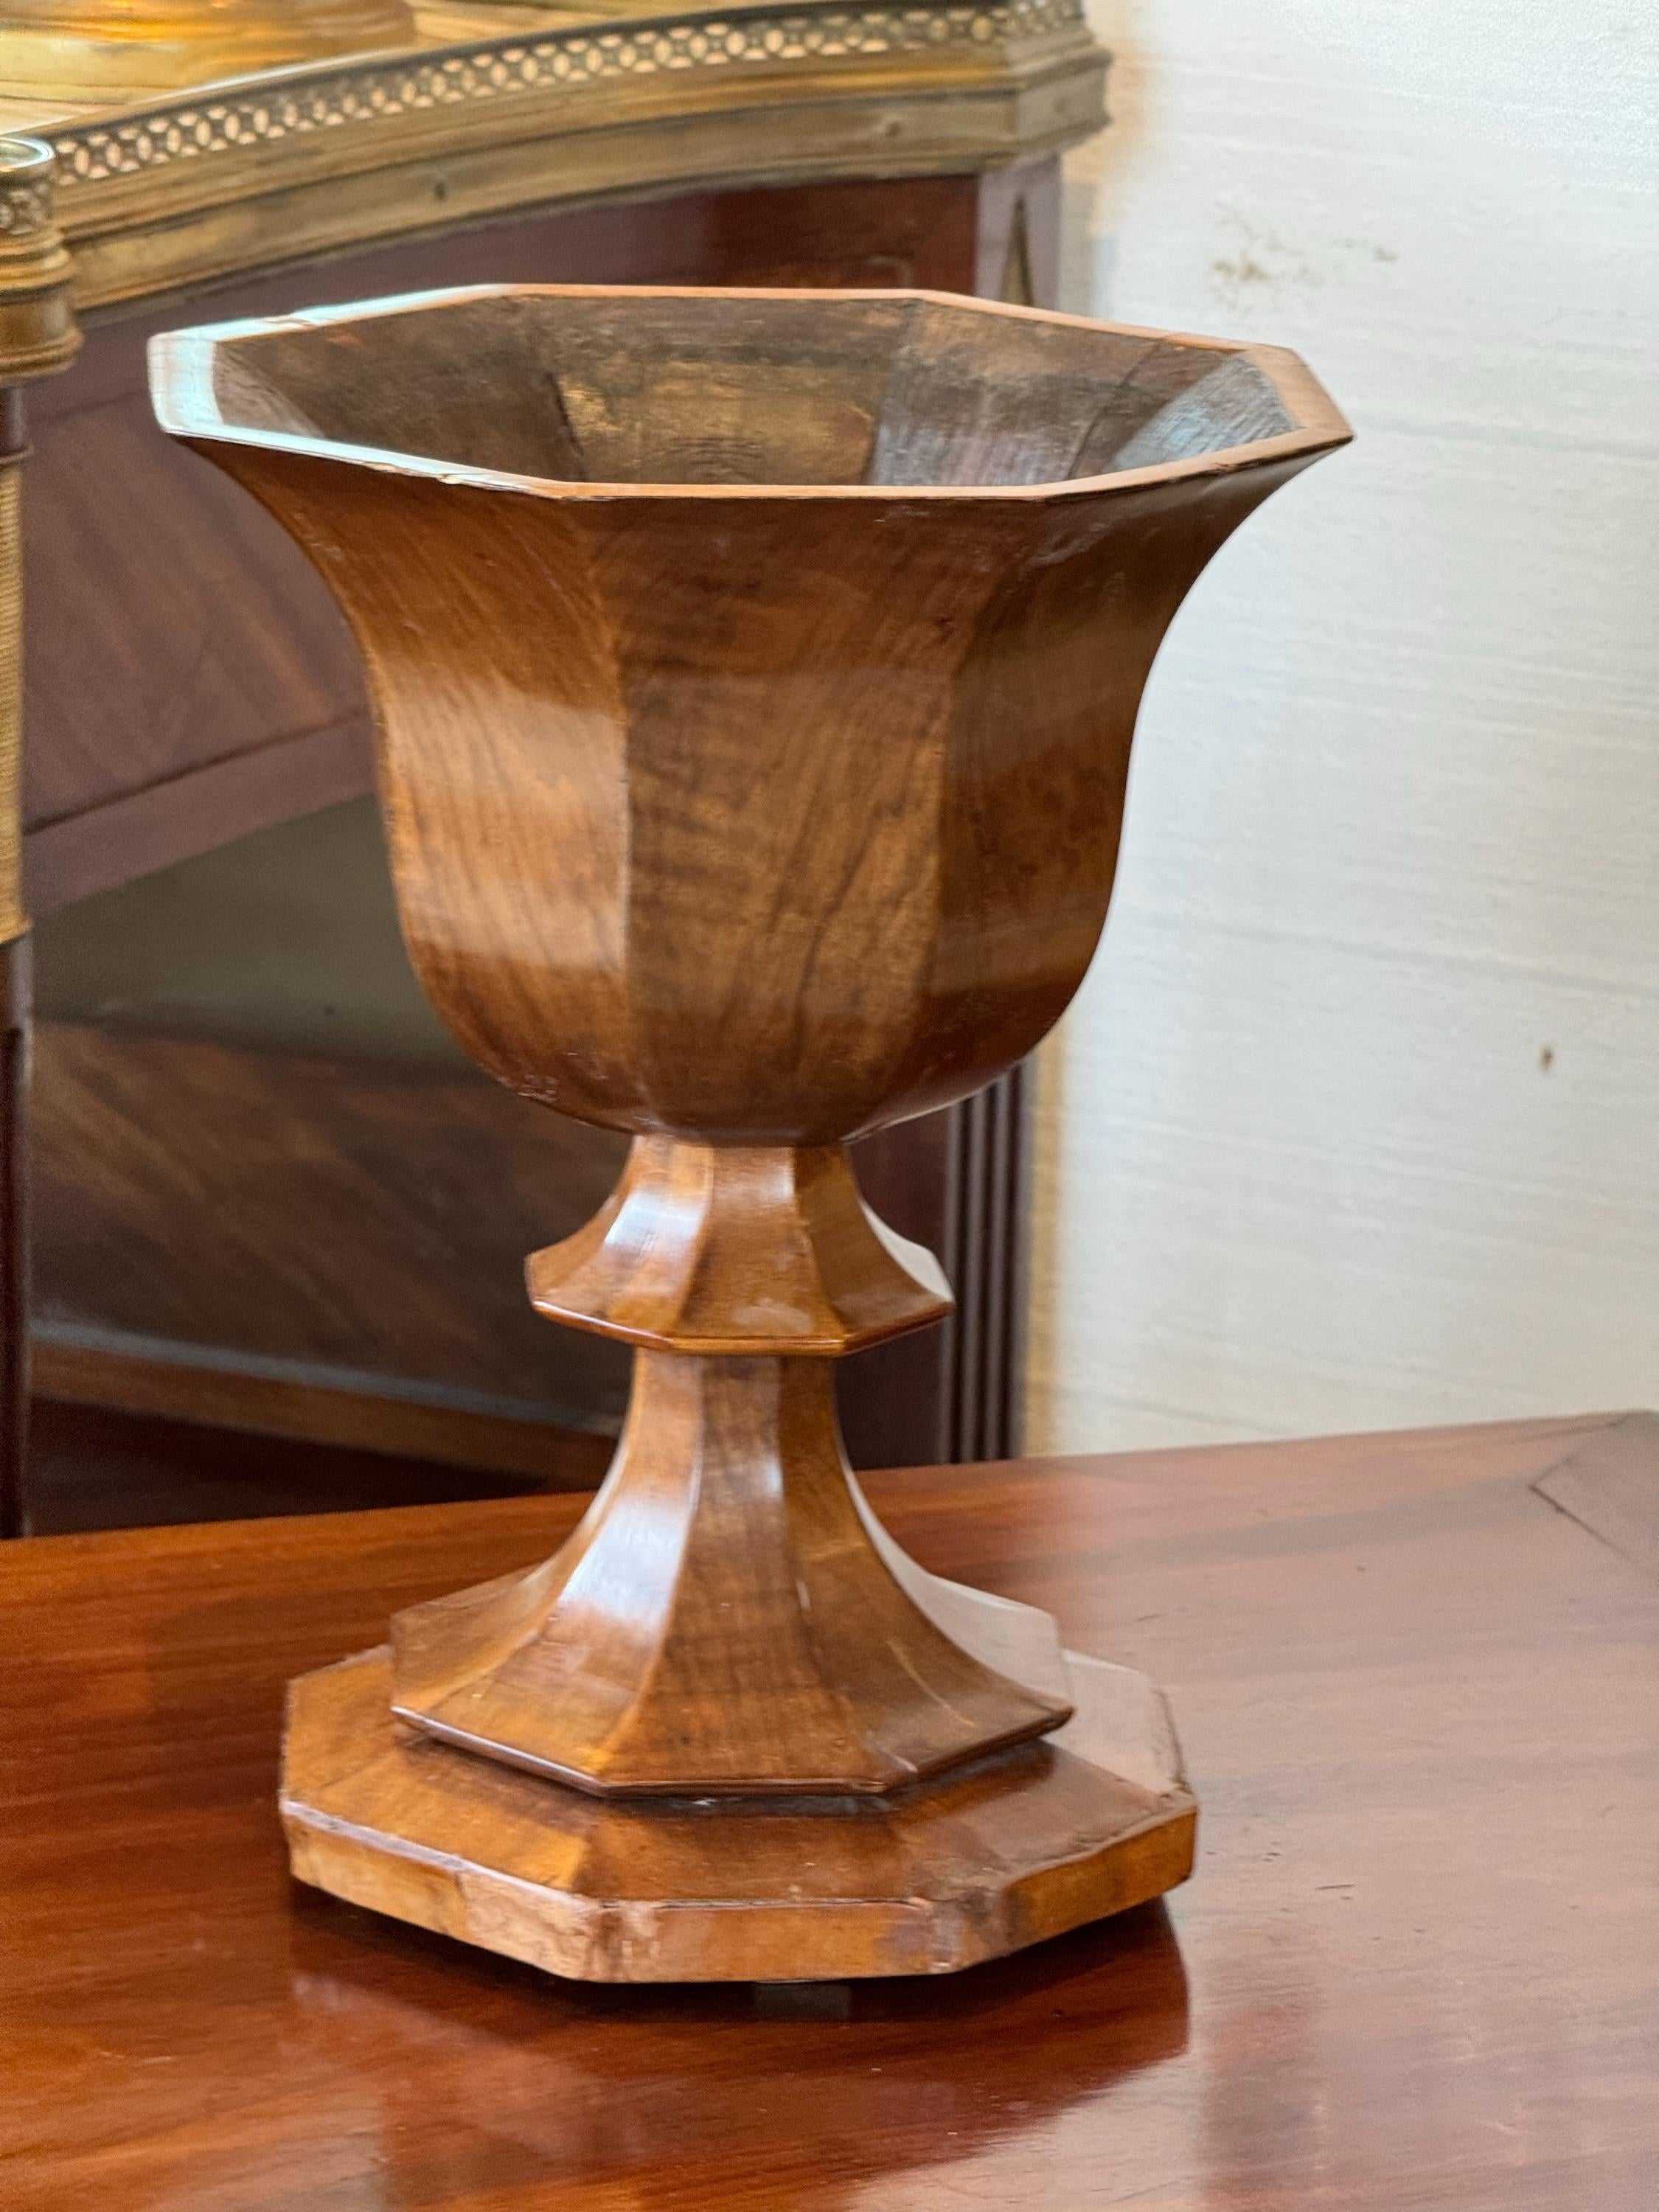 A wooden urn with pretty veneers. Great on a table.